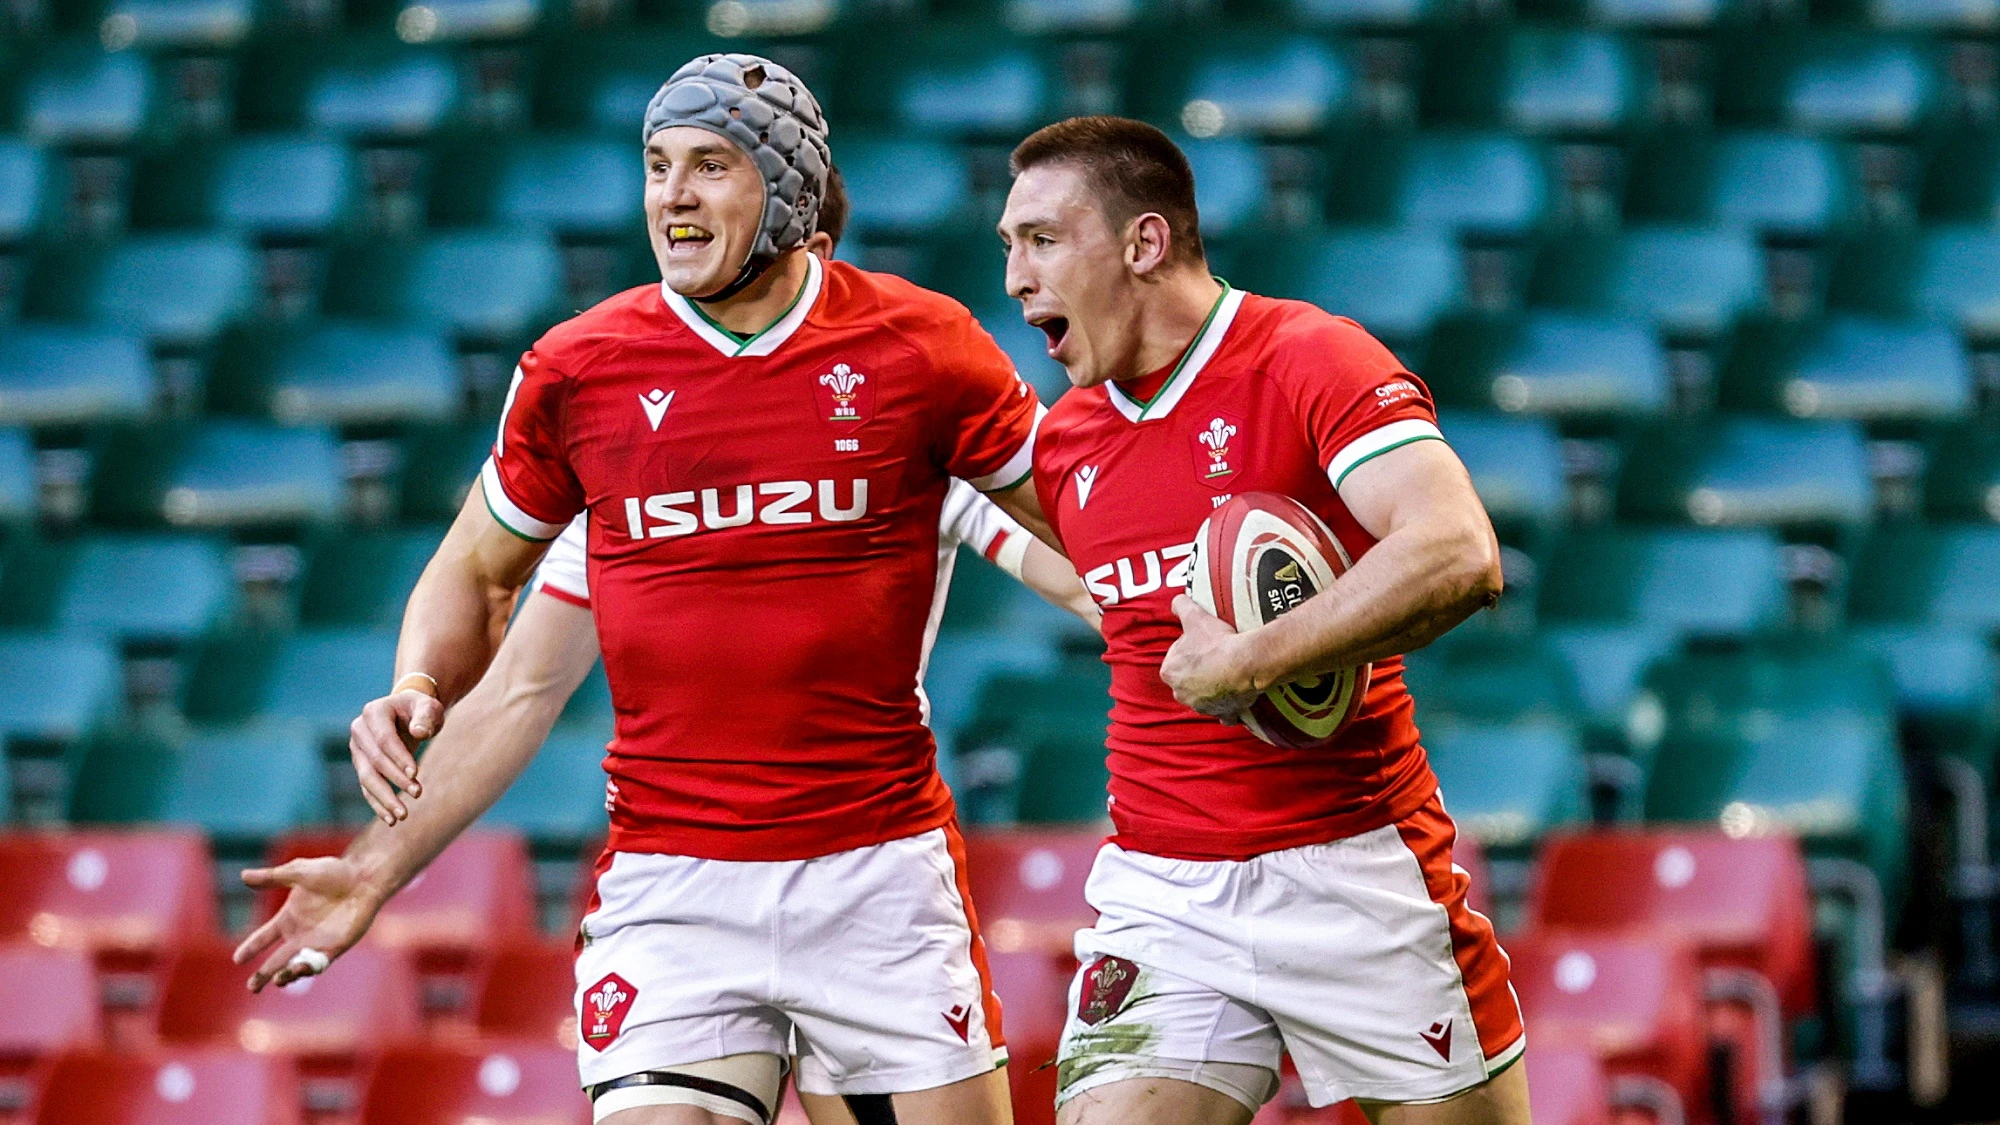 Jonathan Davies celebrates with Josh Adams after he scores a try 27/2/2021